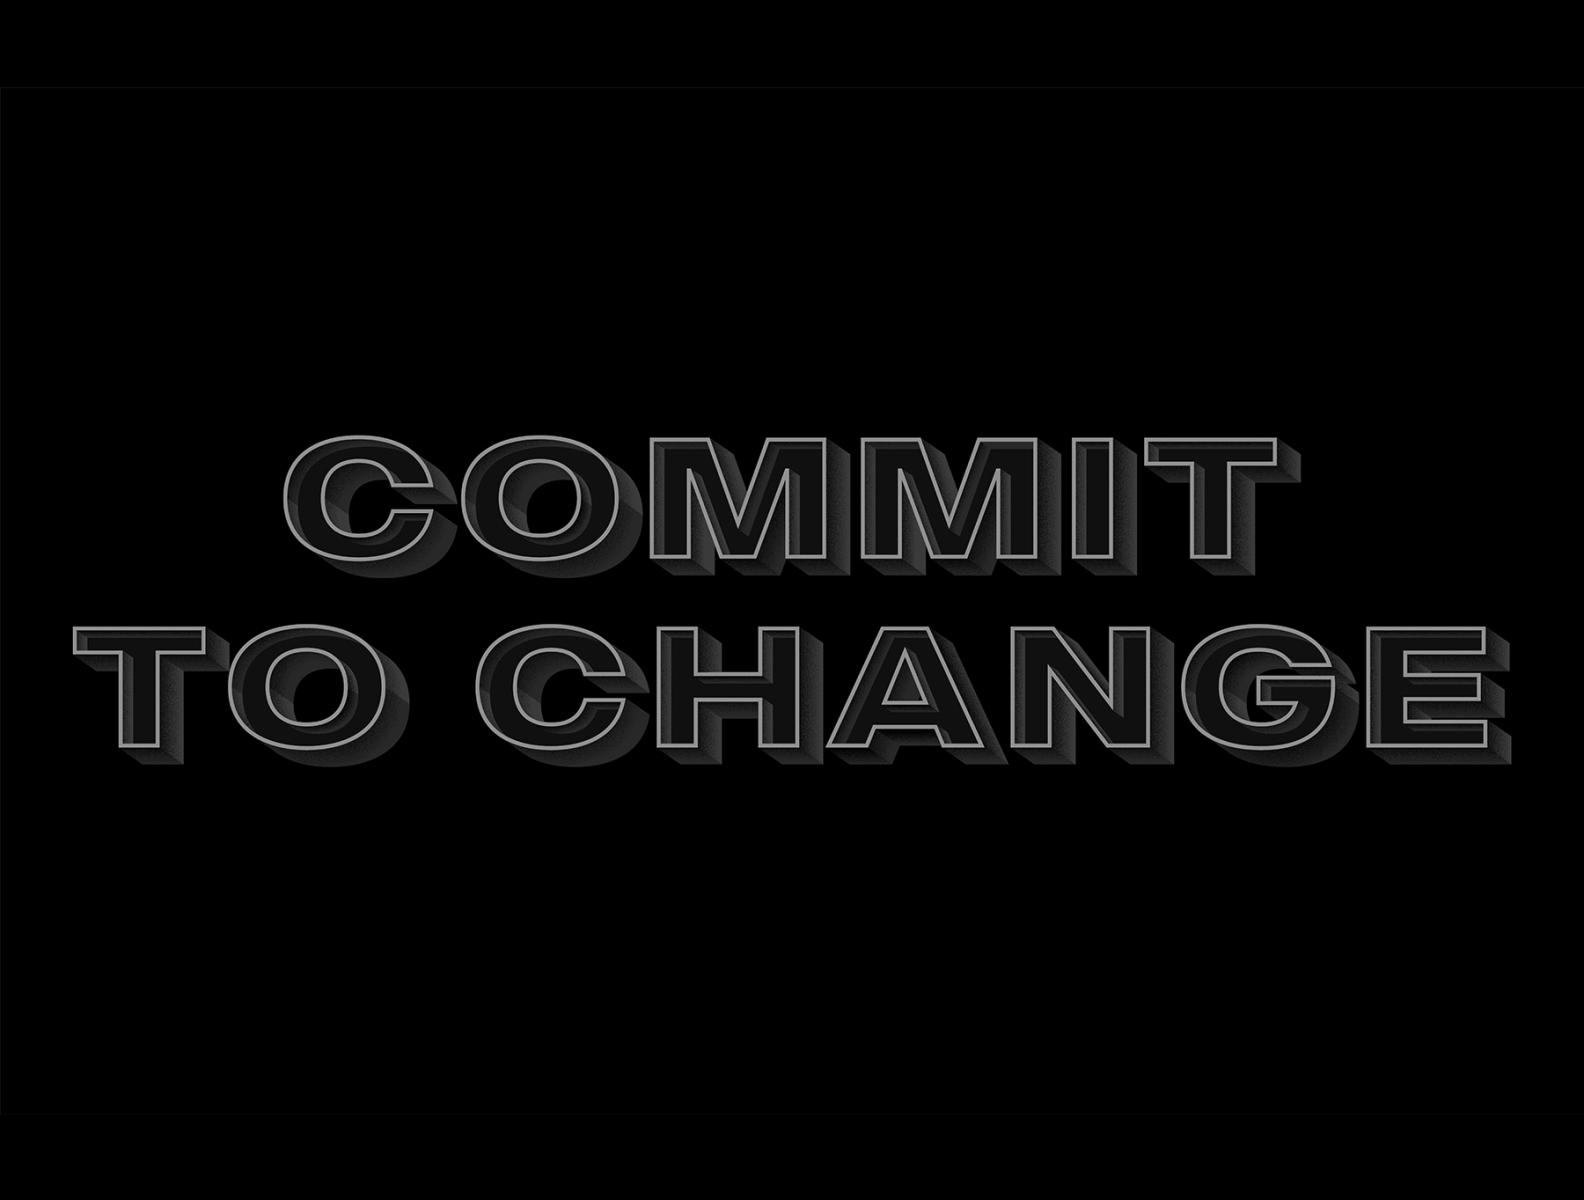 Commit to Change by Matthew Blick on Dribbble